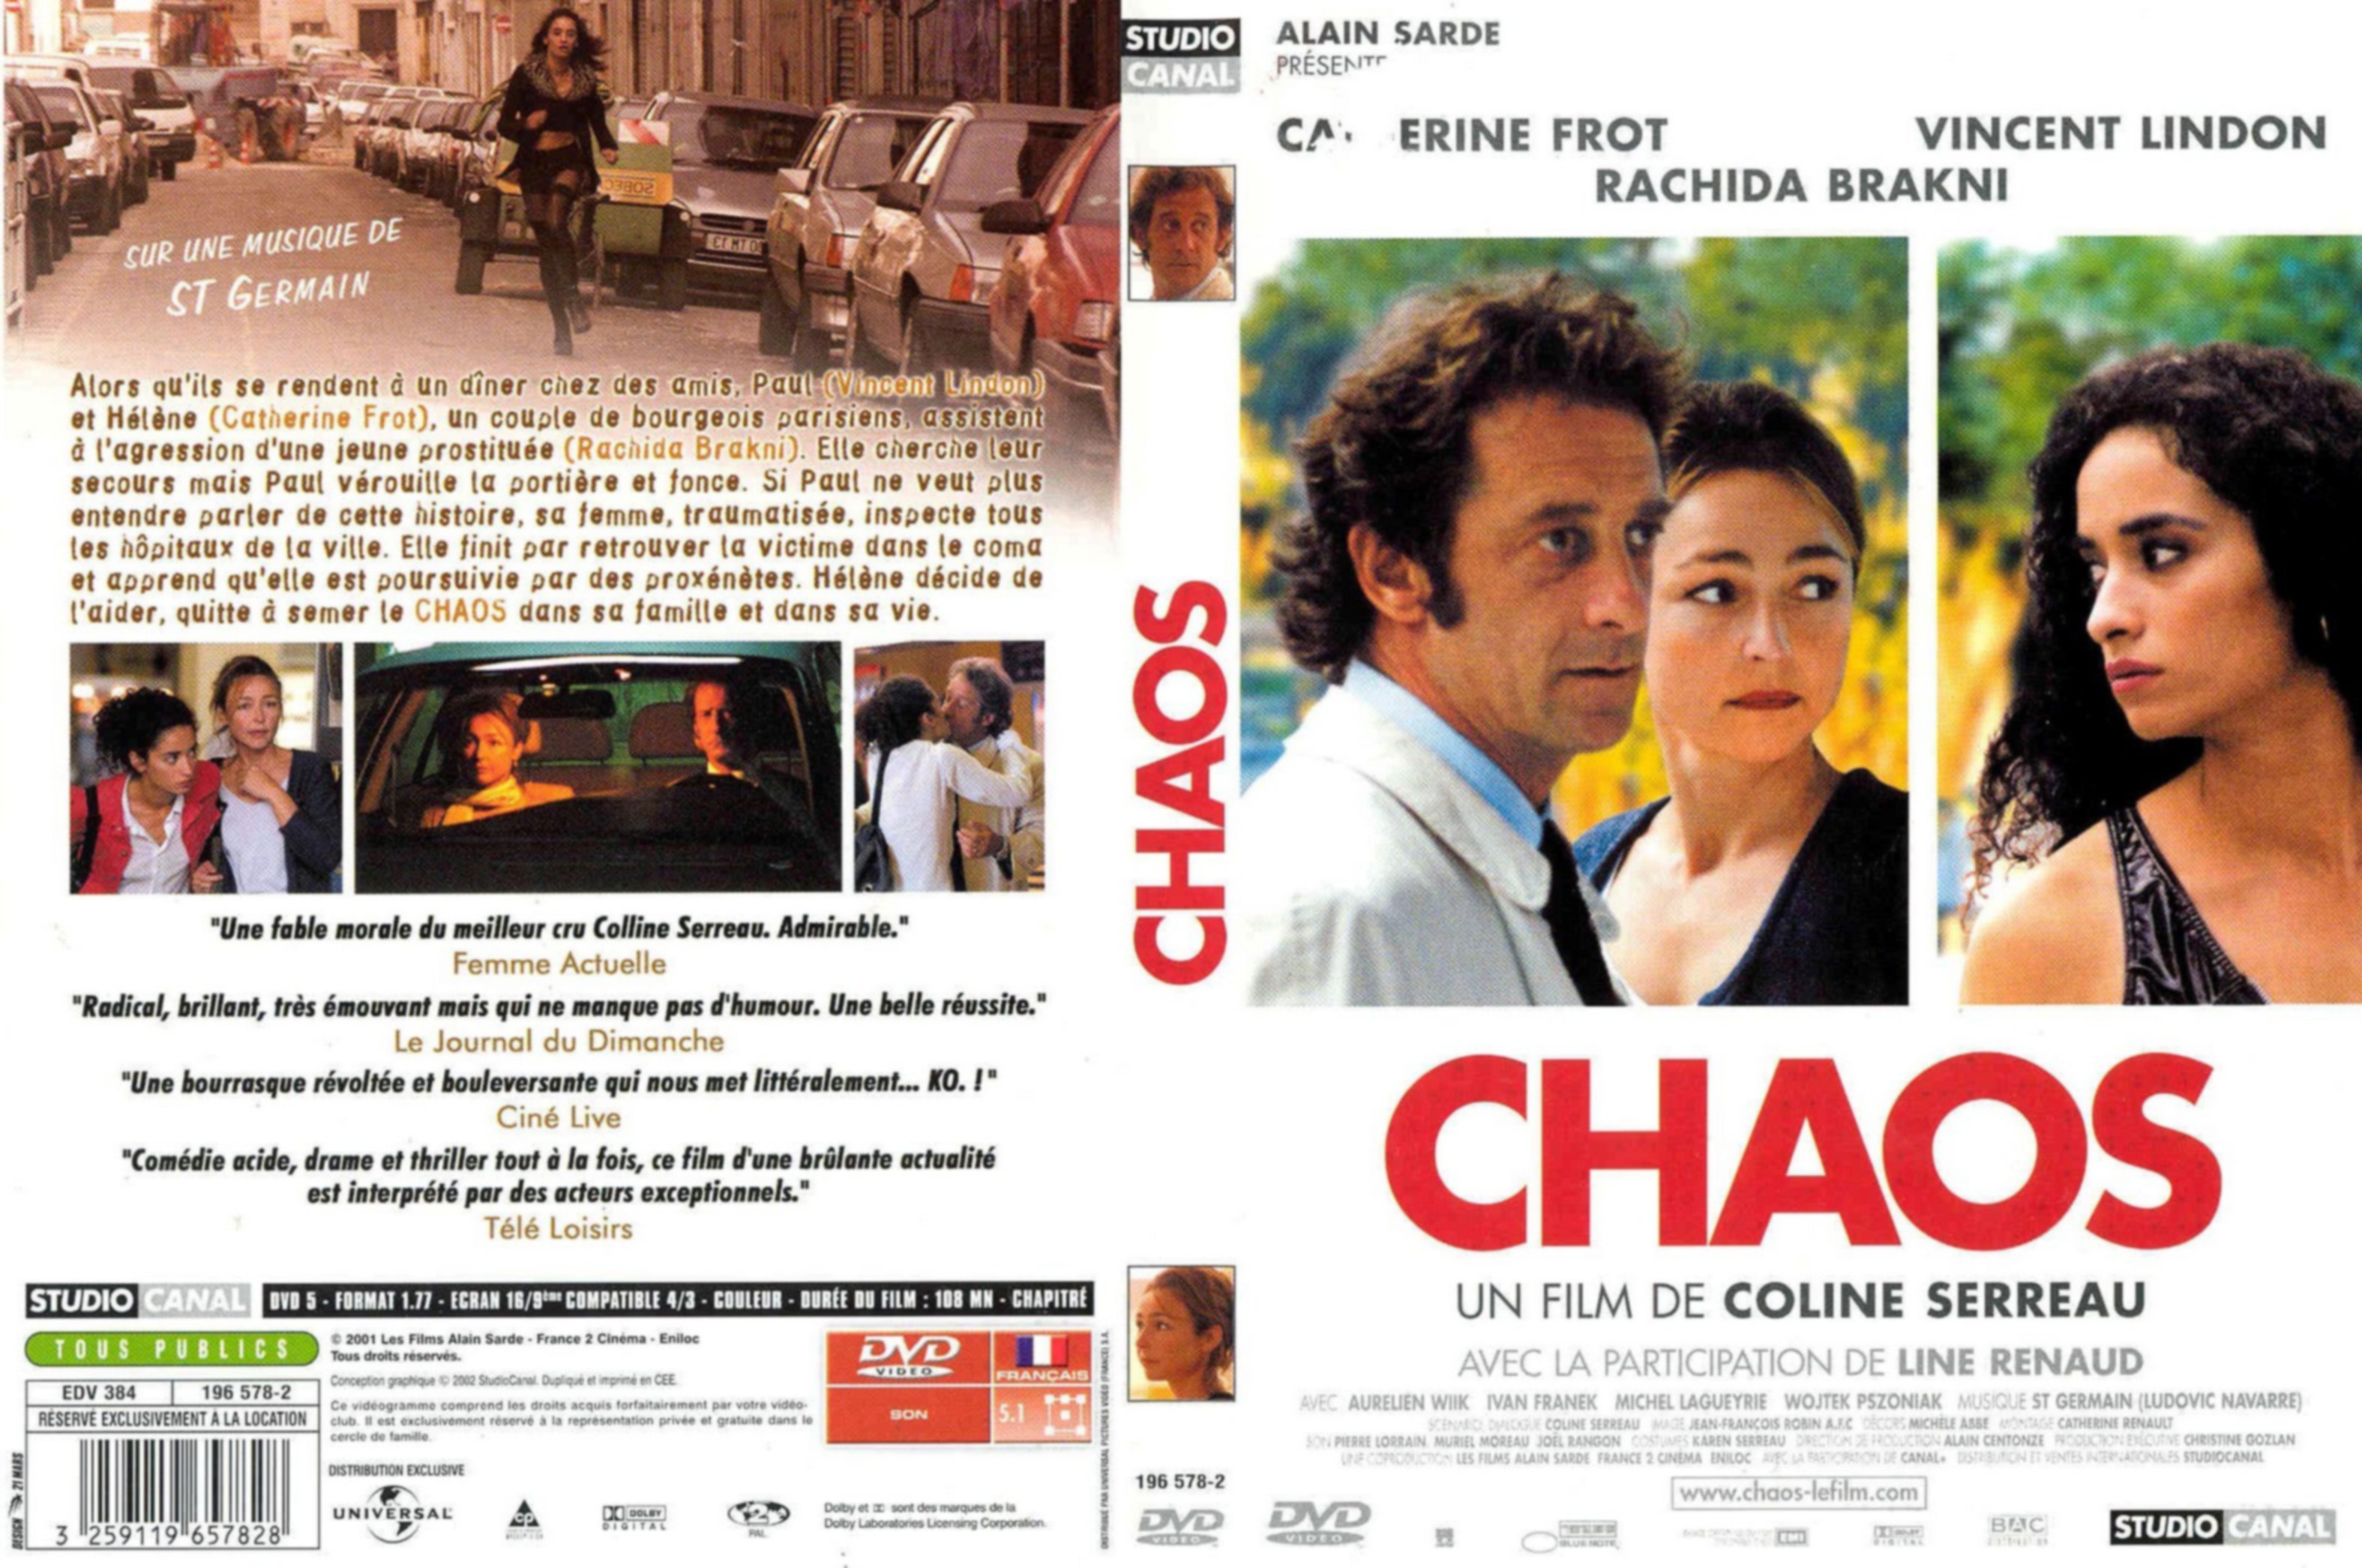 Jaquette DVD Chaos (2001)